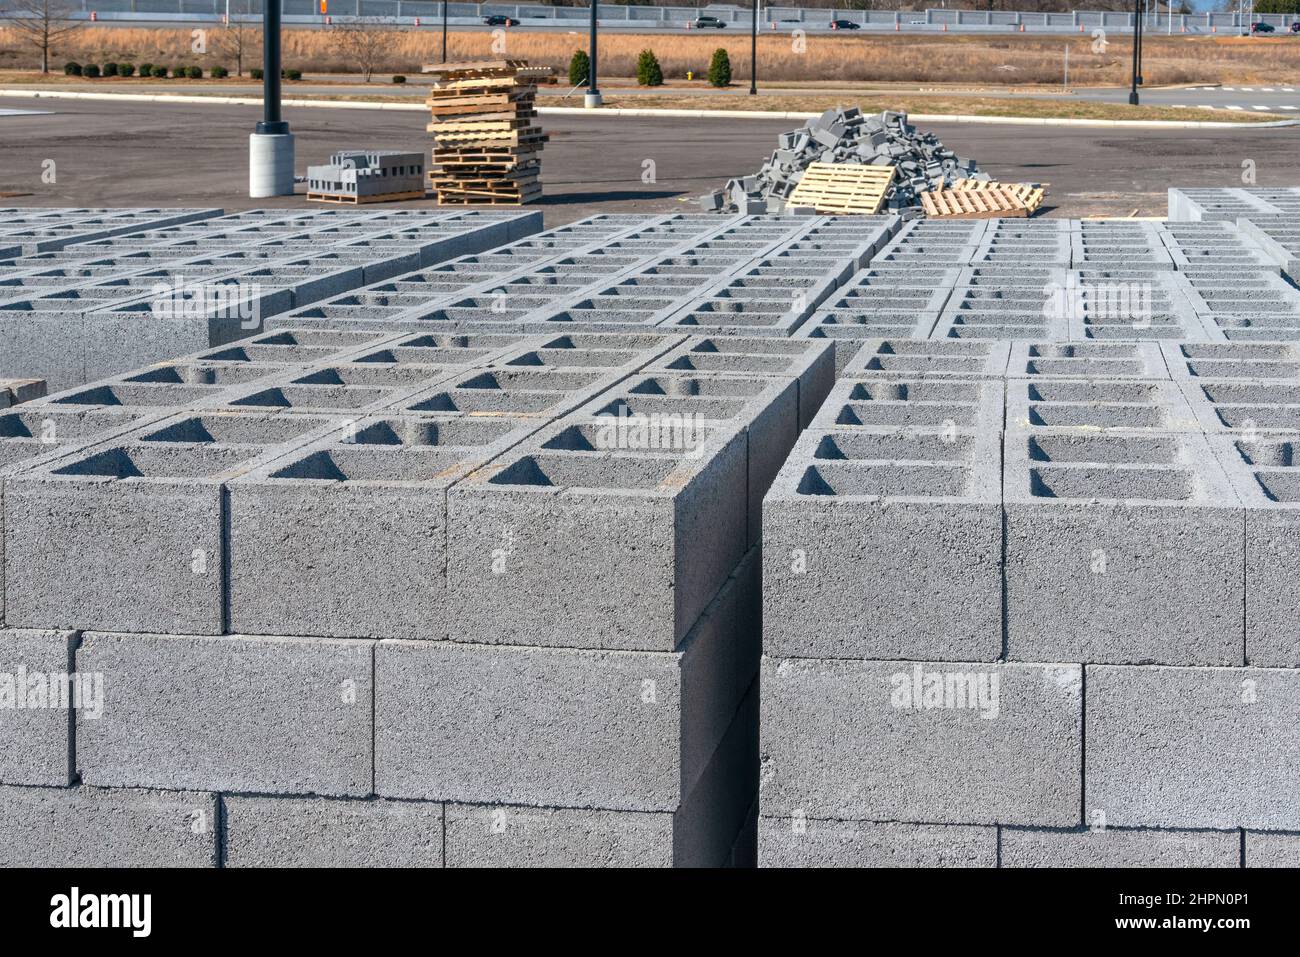 Horizontal shot of cinder blocks with a pile of broken ones in the background. Stock Photo